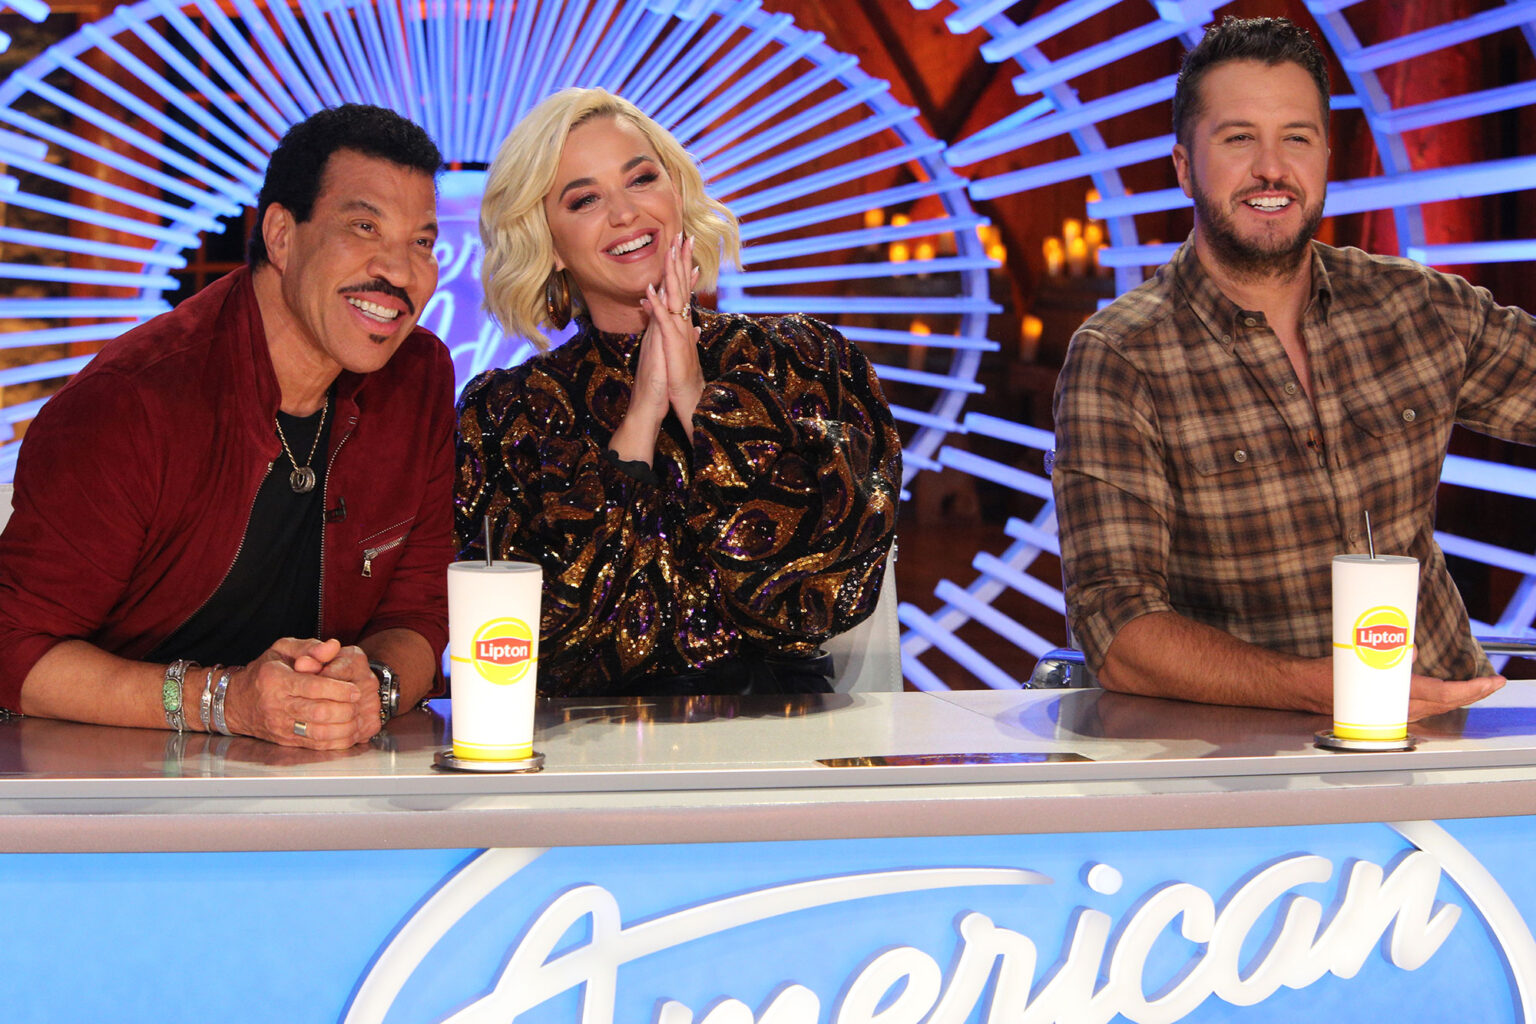 'American Idol' has hit Hollywood week, and for some, the lights just might be too bright. Why the show might be putting too much on its contestants.